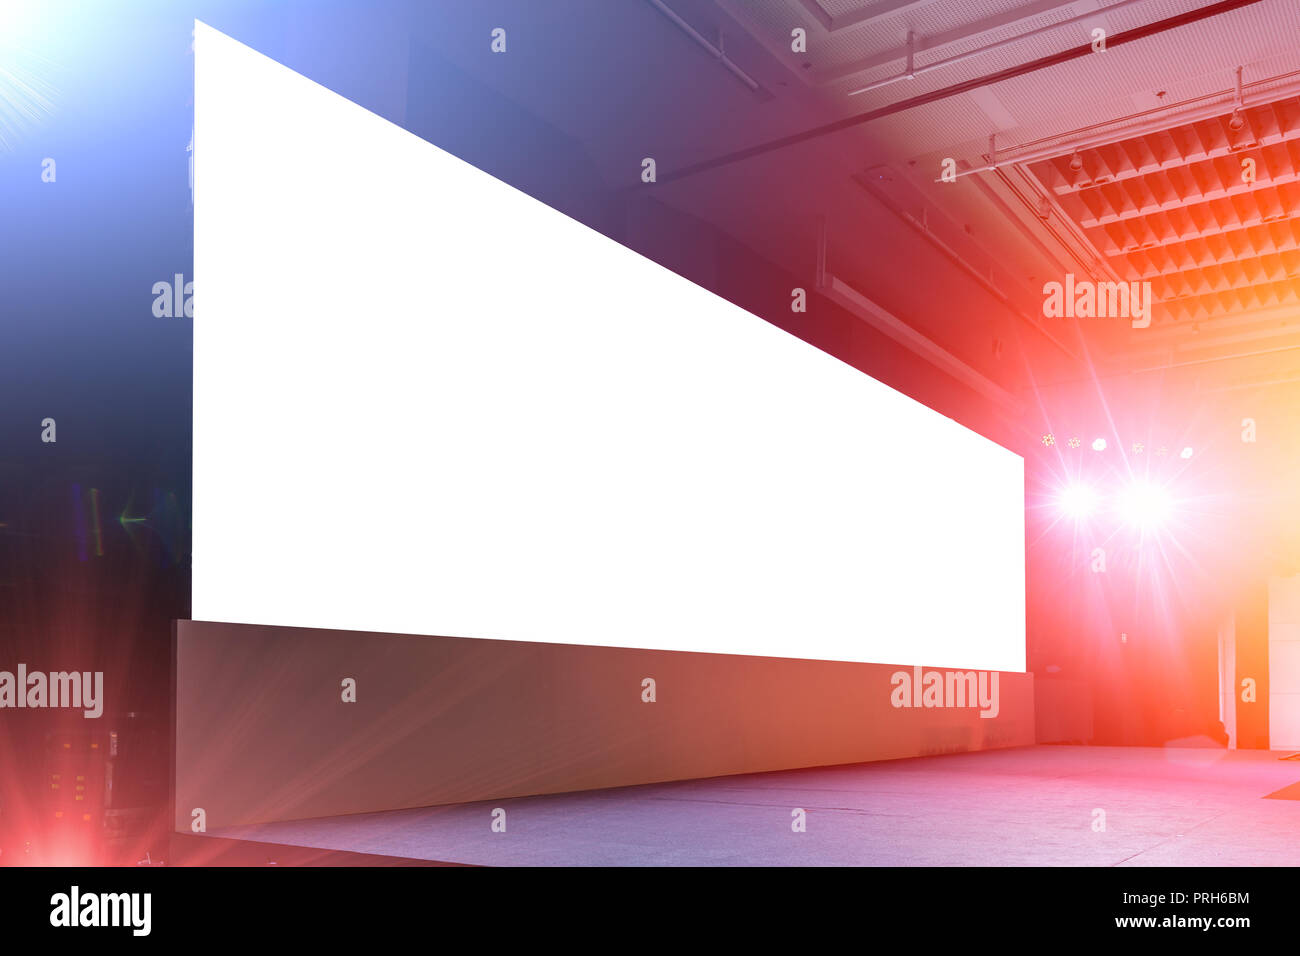 blank large led billboard screen panel background on event light and sound  stage show Stock Photo - Alamy